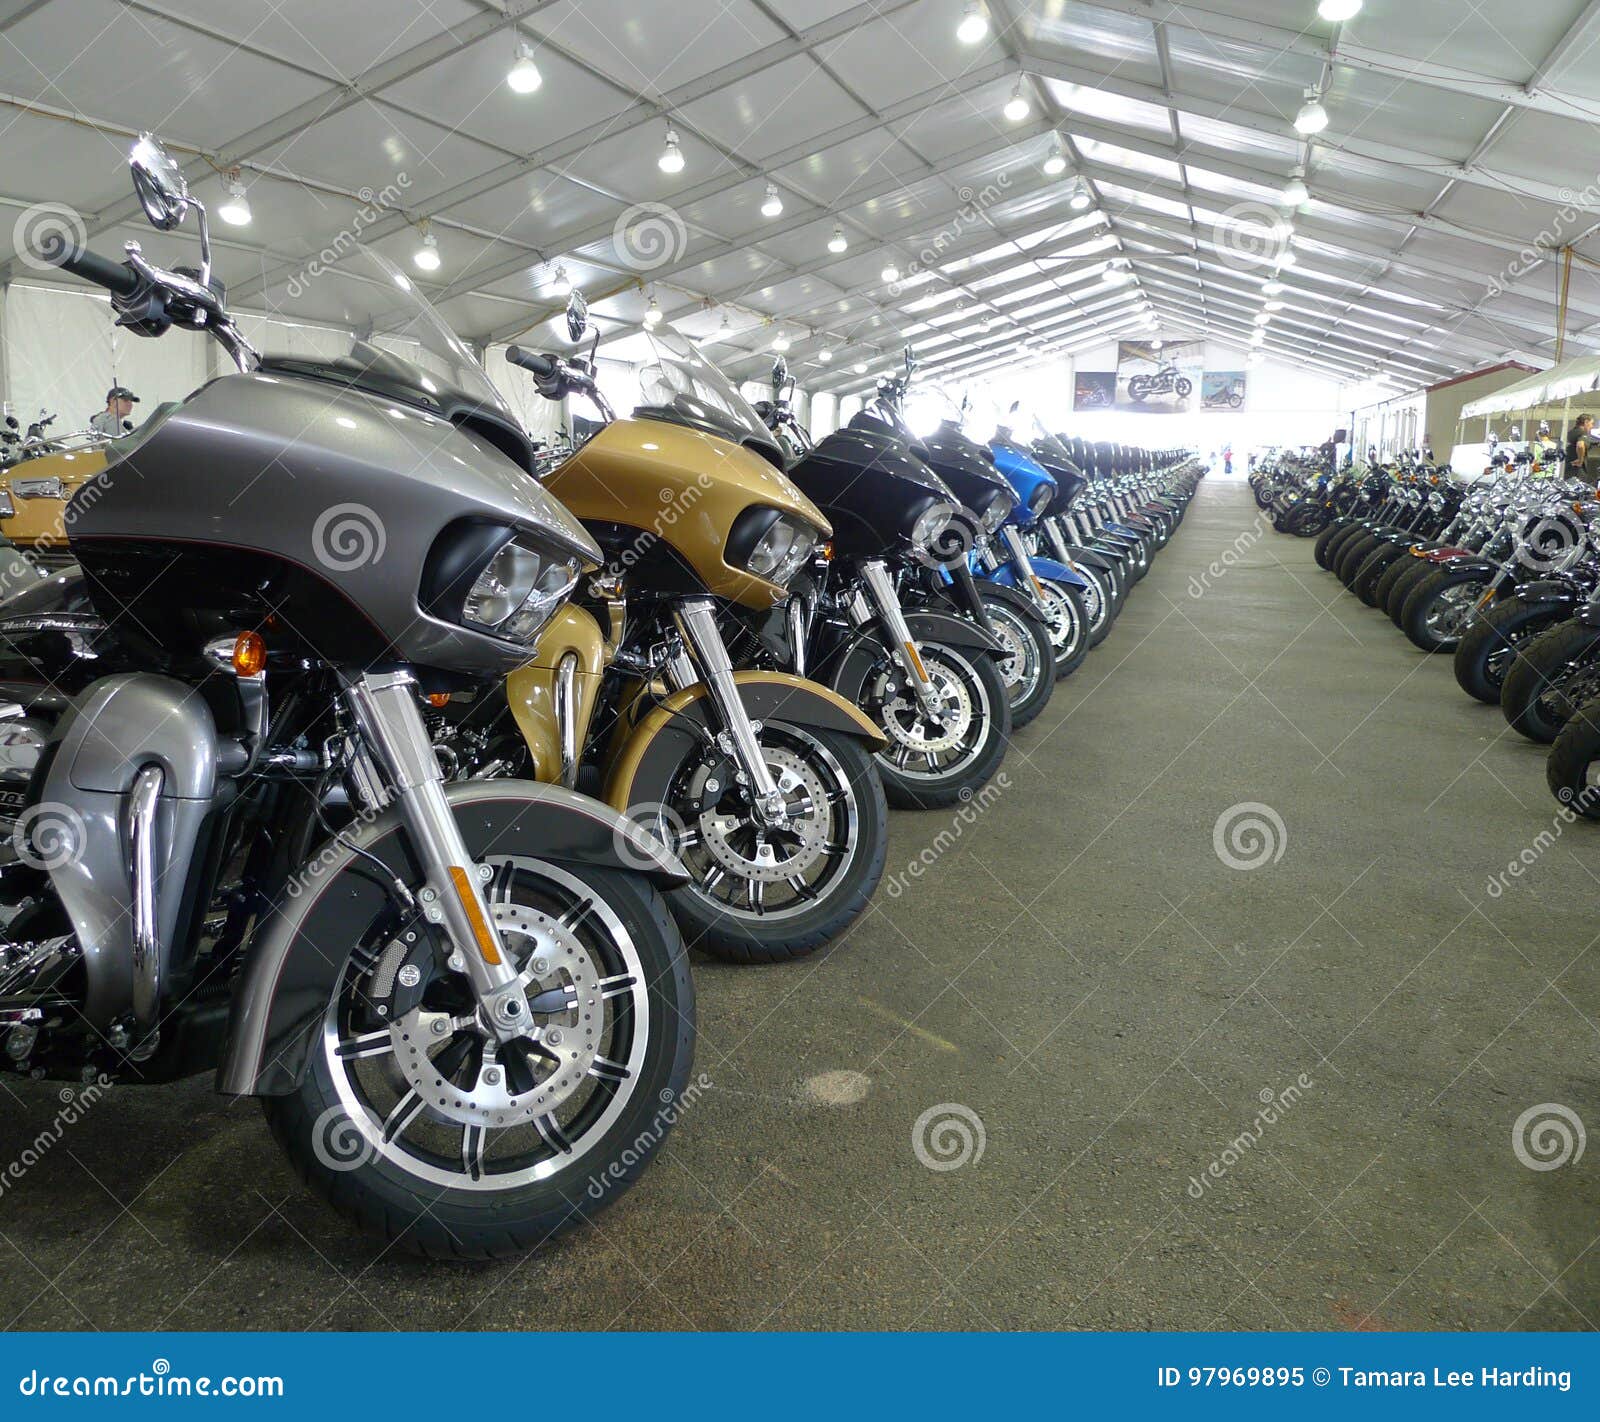 Motorcycles For Sale At Black Hills Harley Davidson Rapid City South Dakota Editorial Image Image Of City Offers 97969895